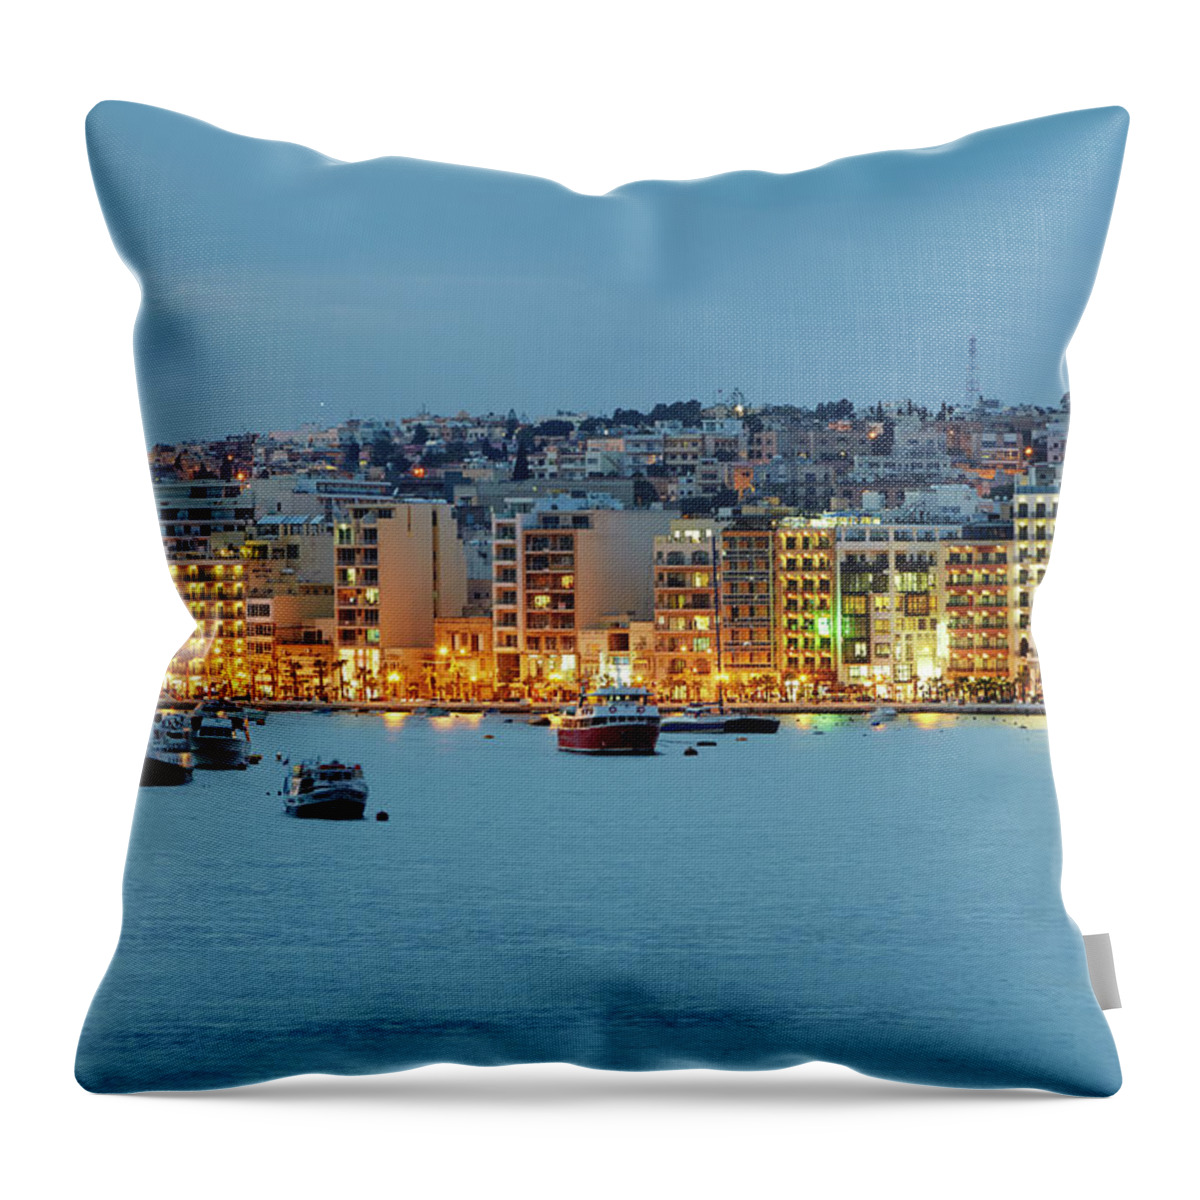 Hotel Throw Pillow featuring the photograph Harbourside Of Sliema Illuminated At by Allan Baxter